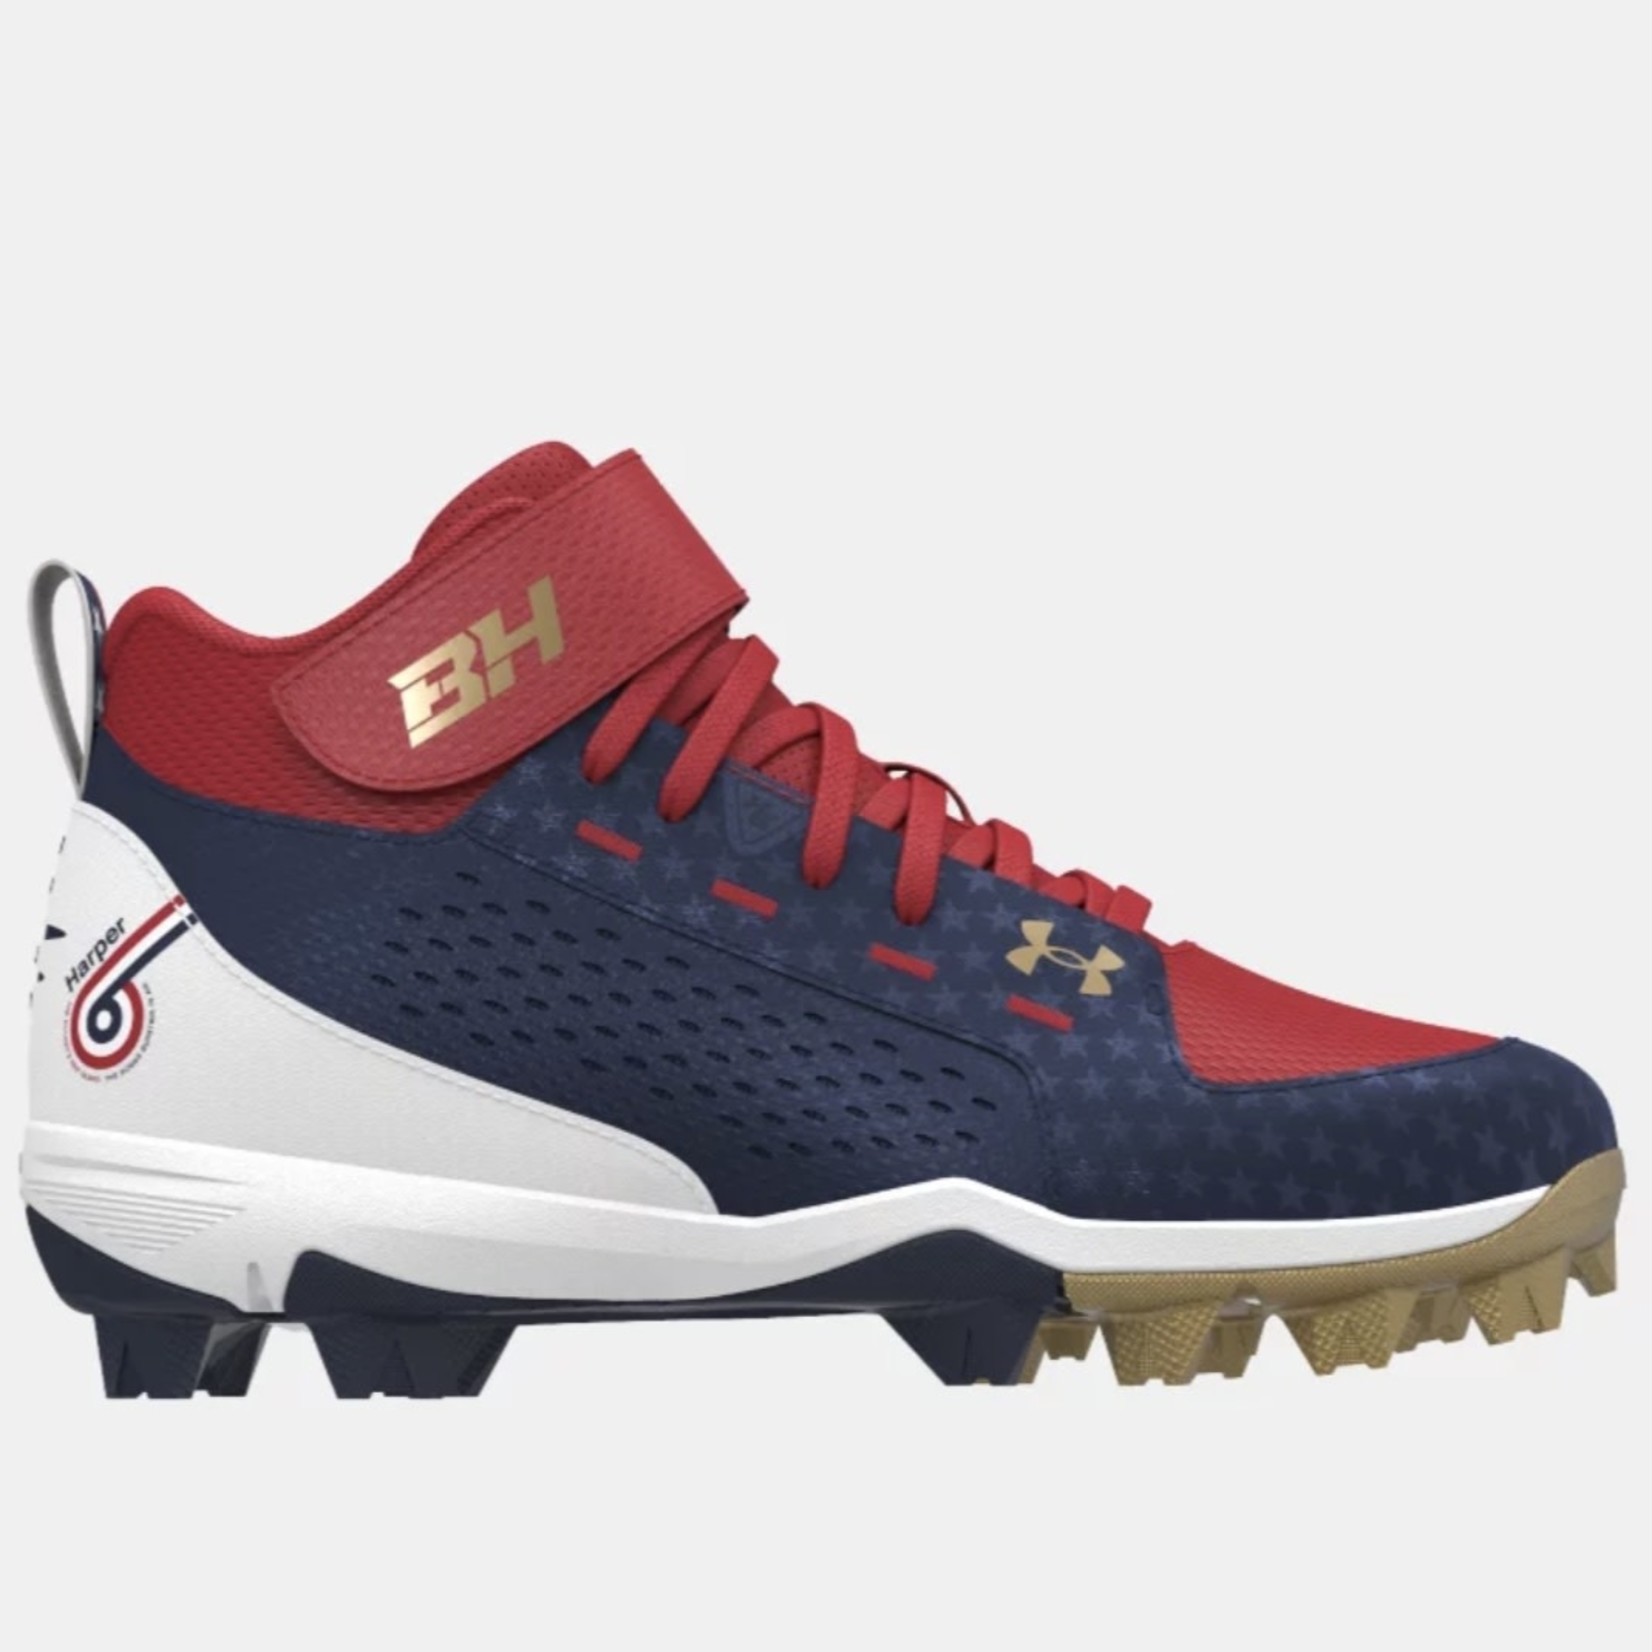 Under Armour Harper 7 USA Mid RM Jr. Youth Baseball Cleats - Red / White / Blue 3.5